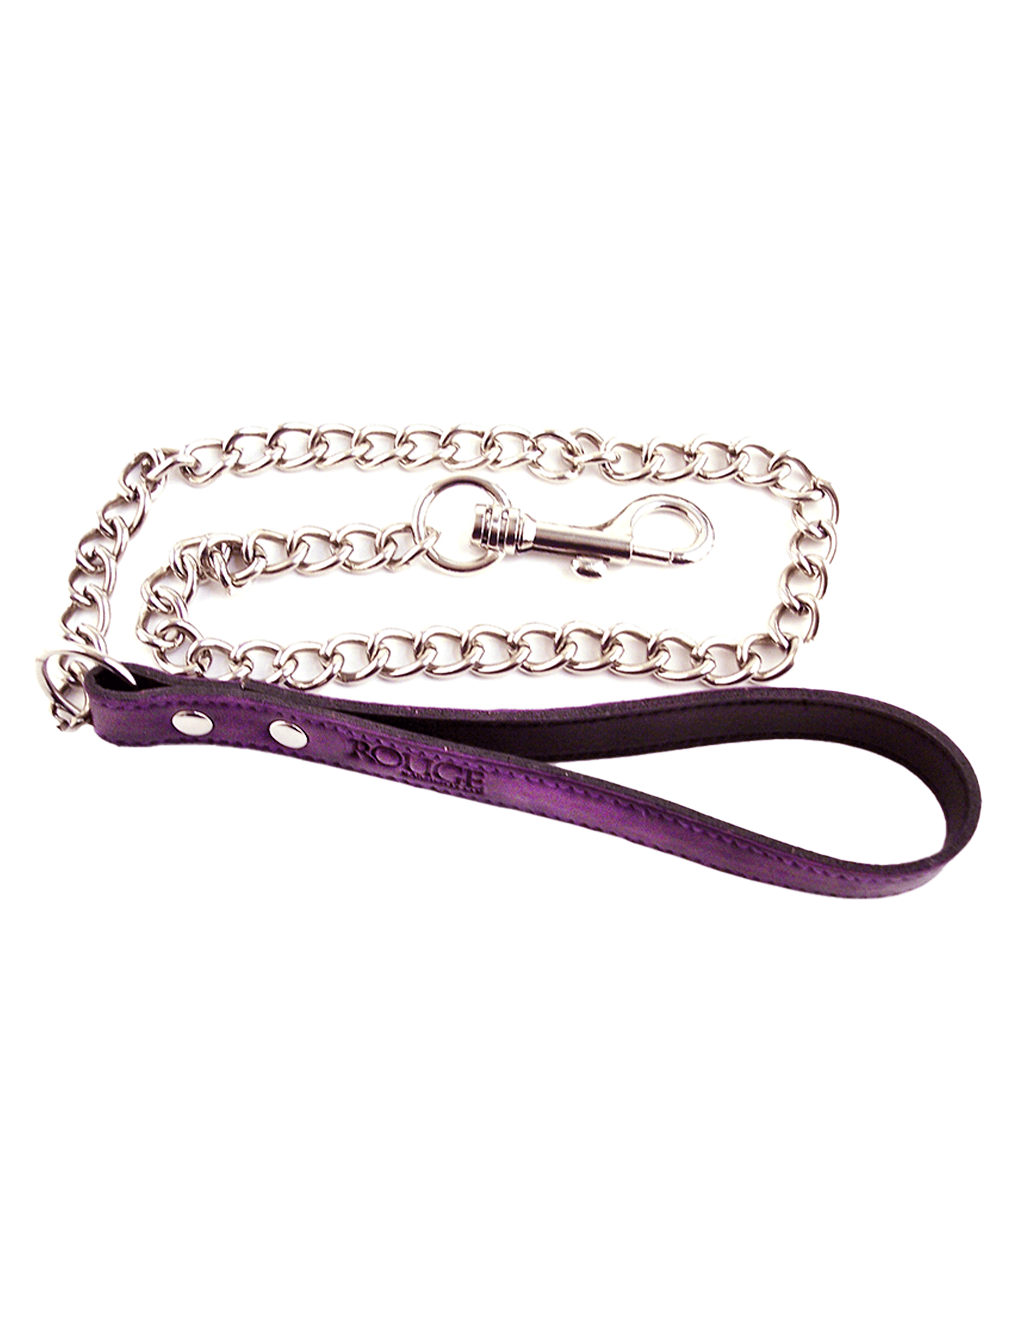 Rouge Leather Lead - Purple - Top View